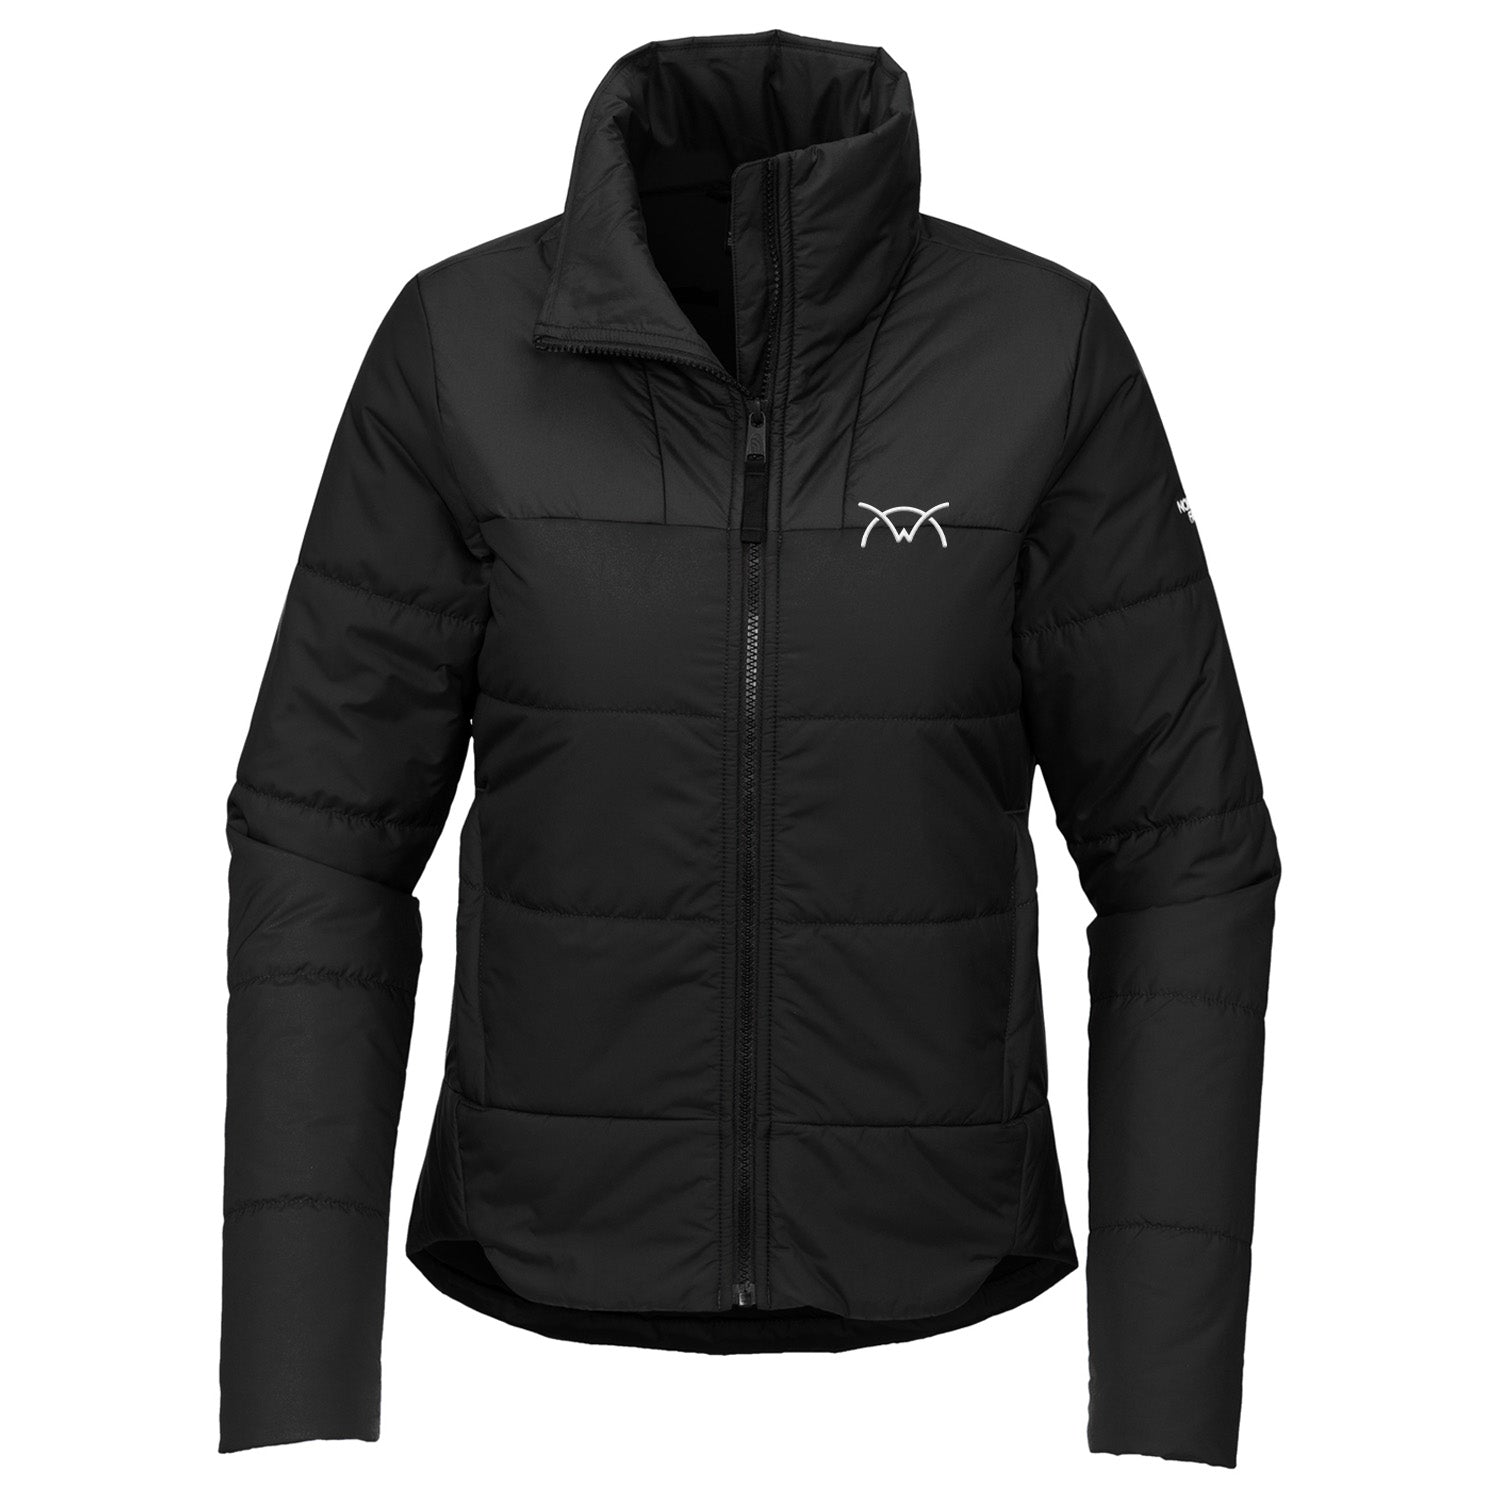 The NorthFace Everyday Insulated Jacket - Ladies' – ConnectWise Owl Outlet